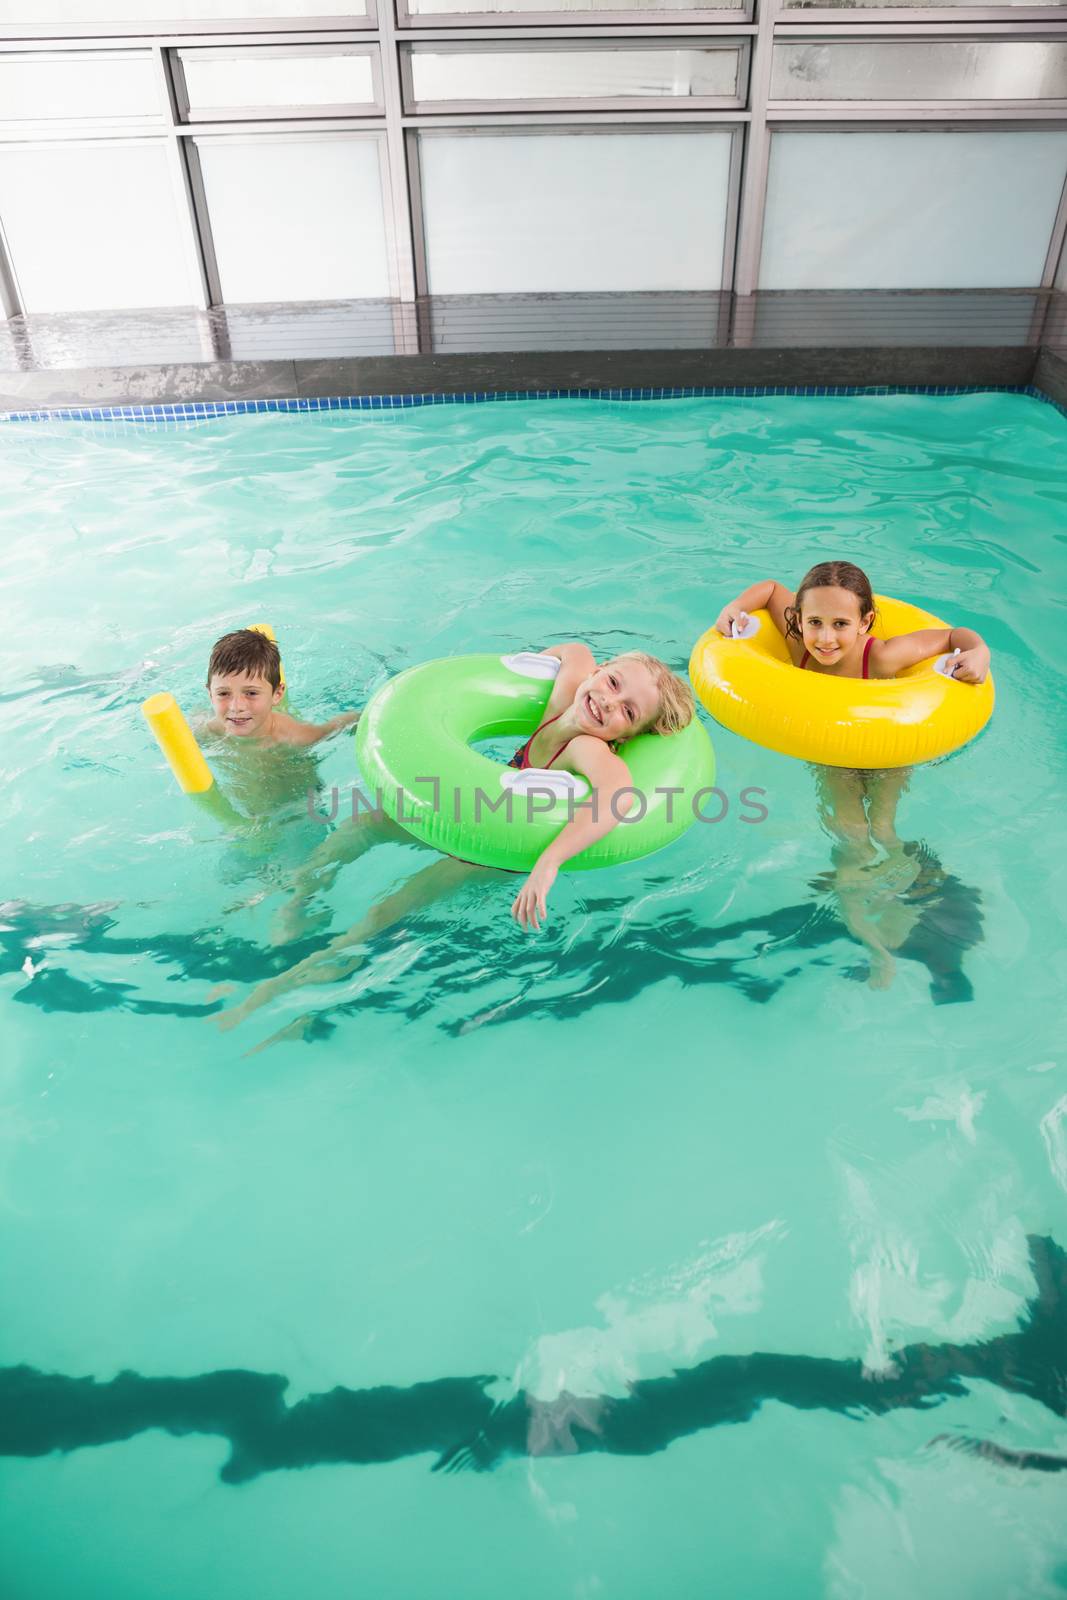 Cute little kids in the swimming pool at the leisure center